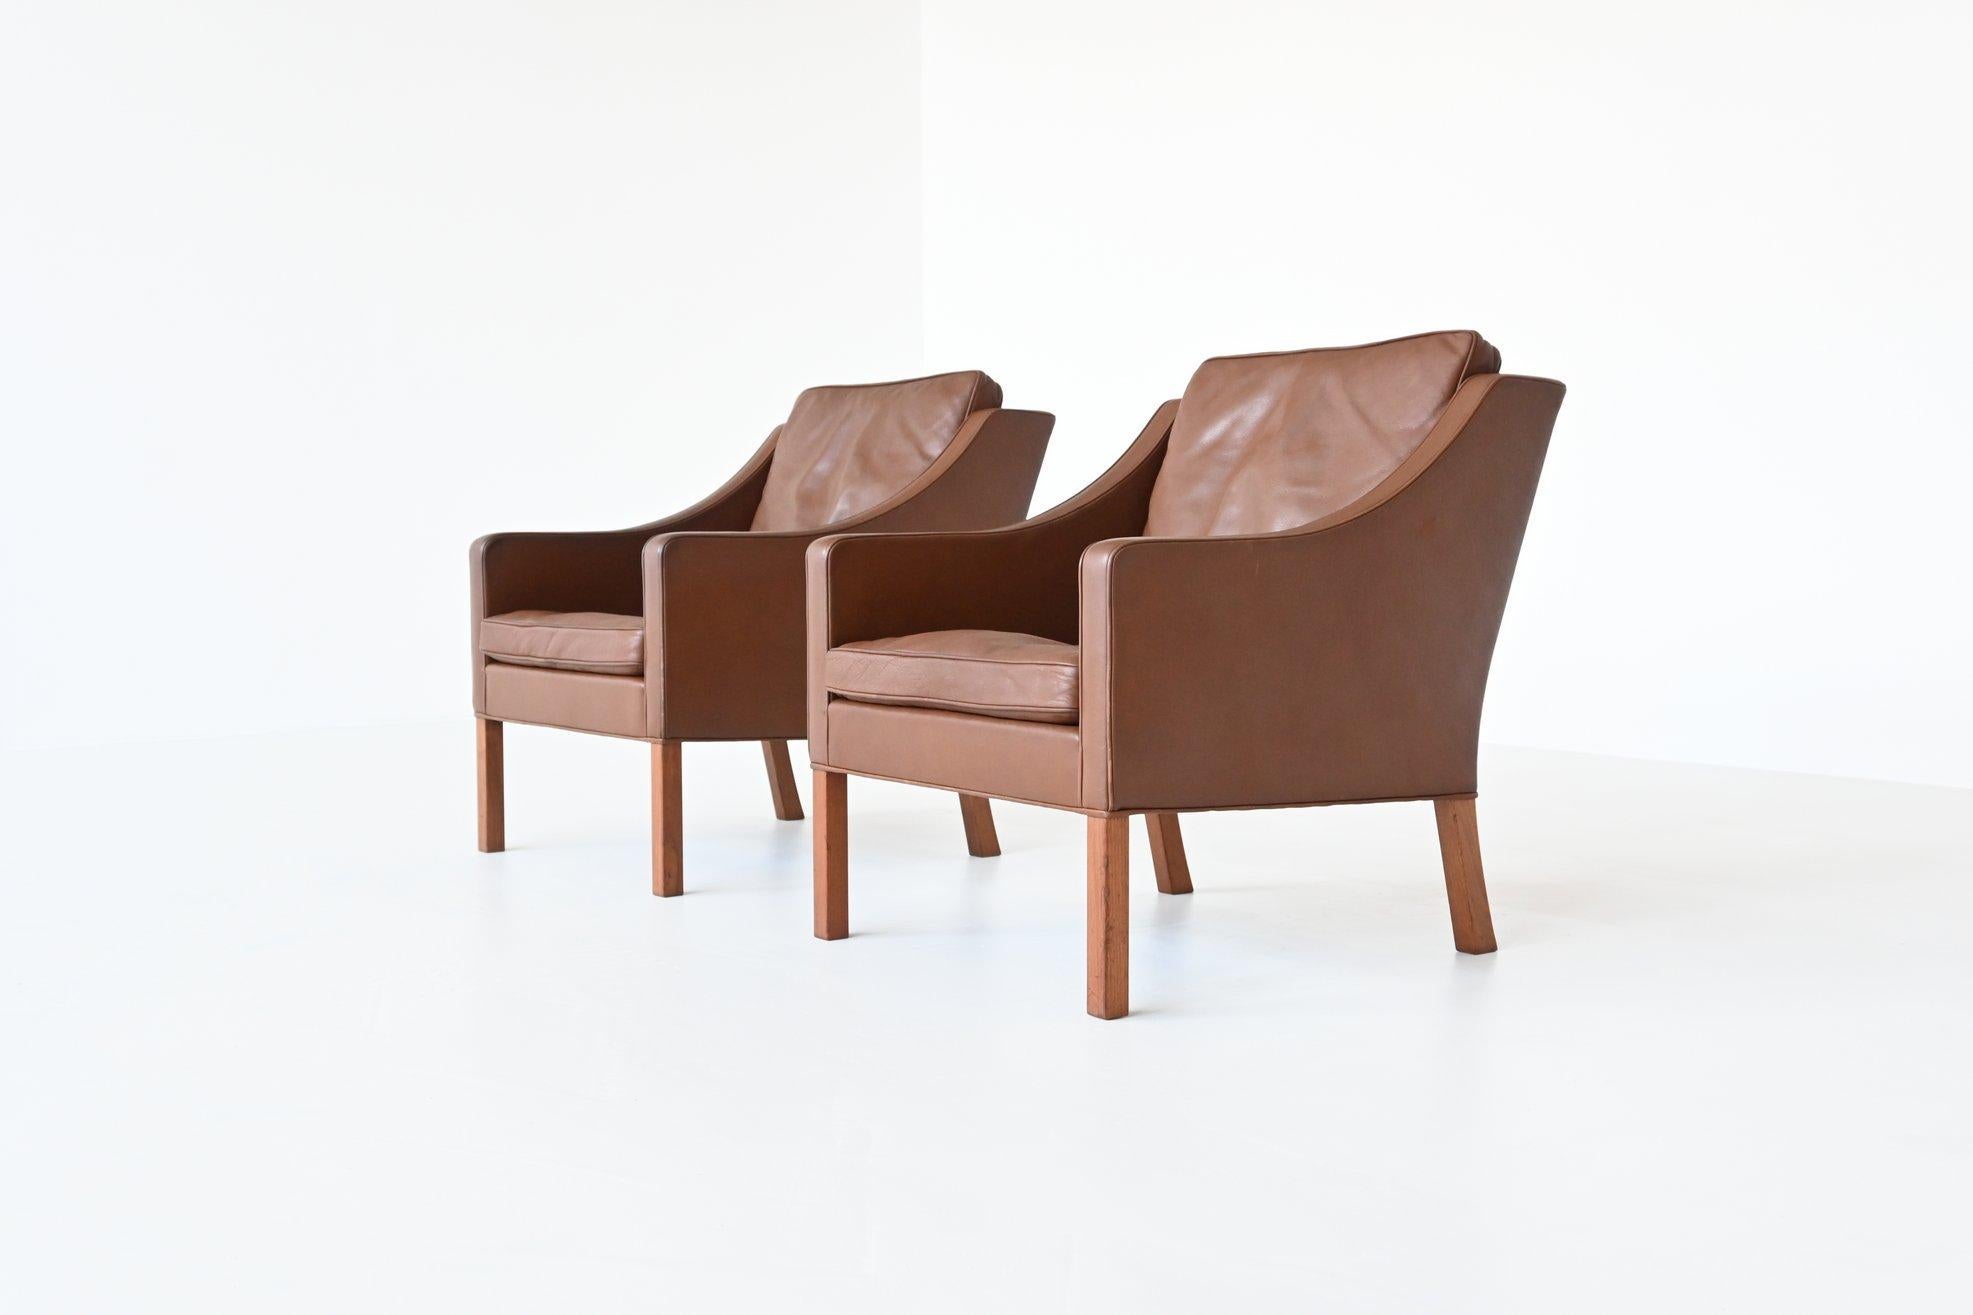 Beautiful pair of lounge chairs model 2207 designed by Børge Mogensen for Fredericia Stolefabrik, Denmark 1963. These chairs have high quality medium brown leather upholstery and solid teak legs. This set is quintessentially Danish; comfortable,